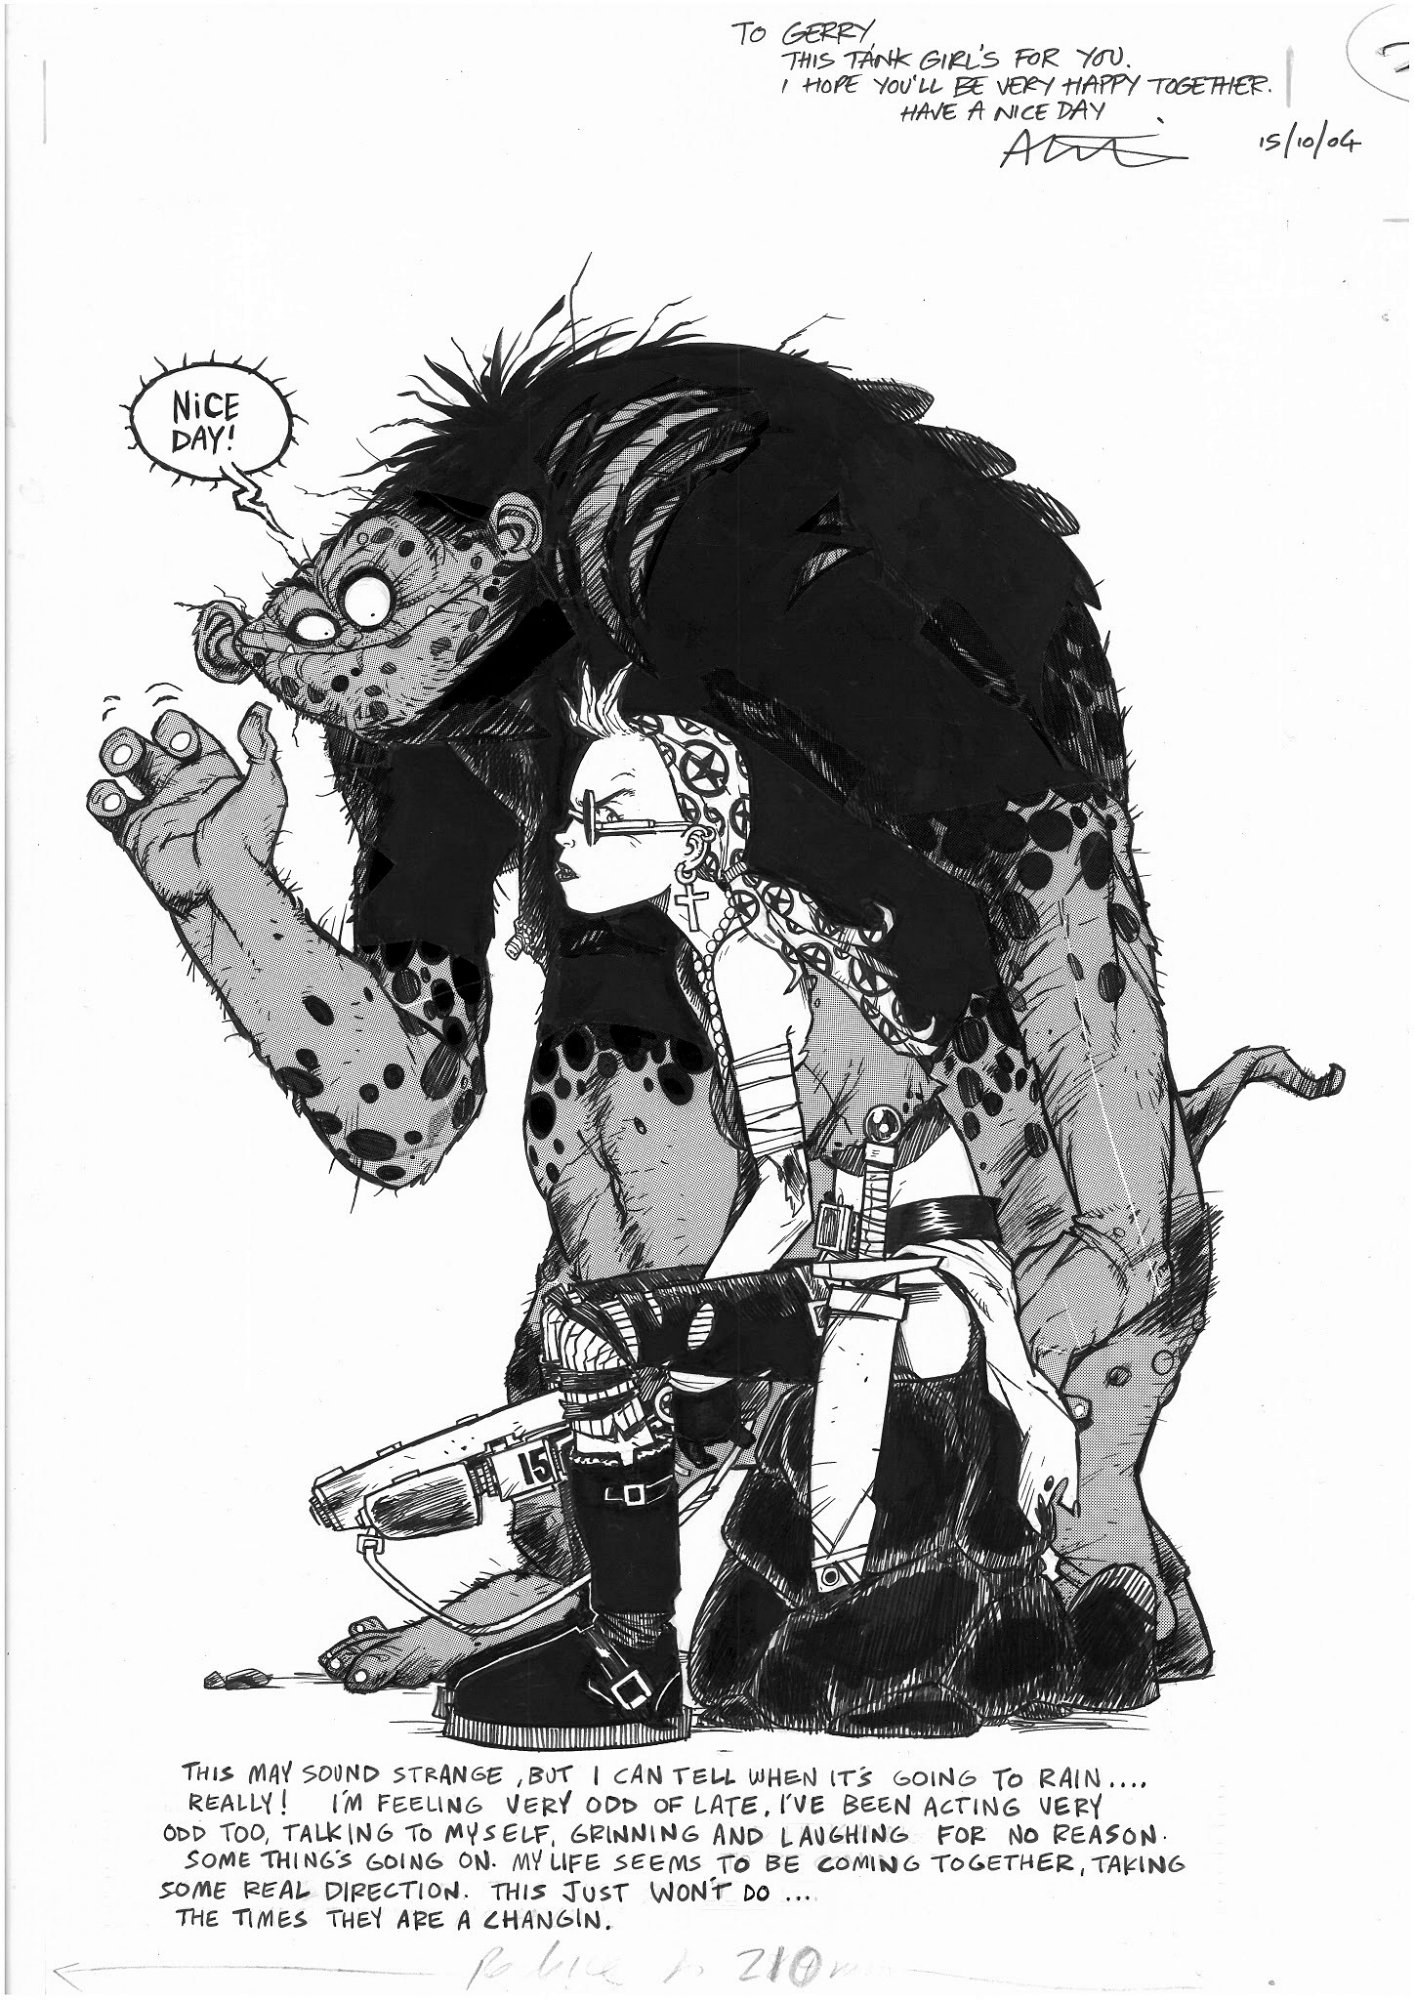 Jamie Hewlett - Tank Girl published Monster Pin Up, in Luca Esse's